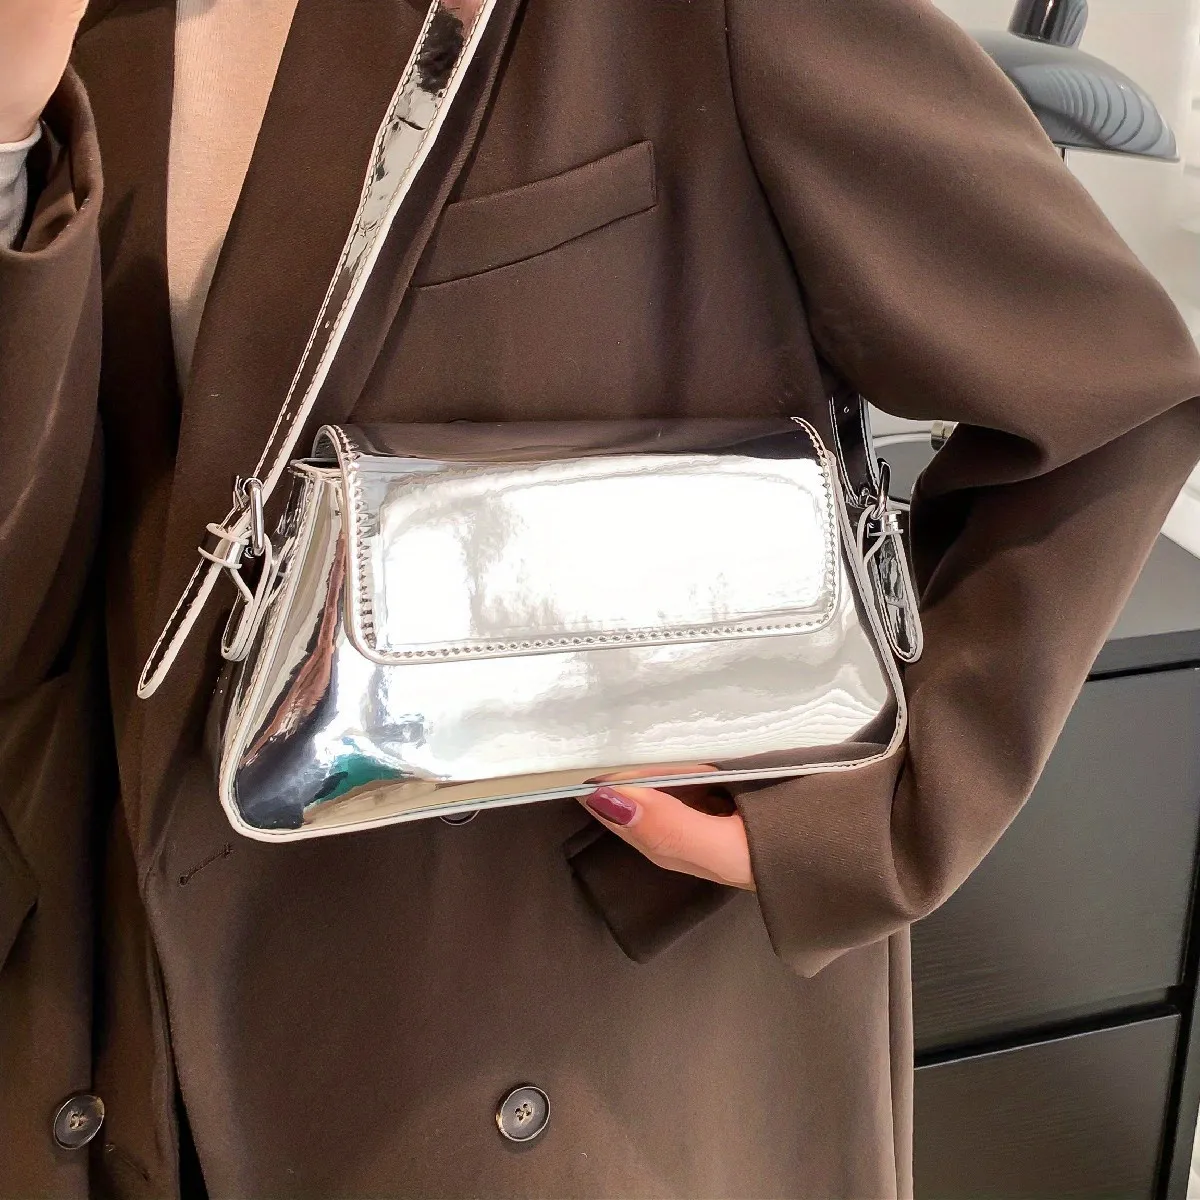 1pc Solid Color Silver Mirror Coated Pu Mini Flap Crossbody Bag Suitable  For Women's Daily Casual Use